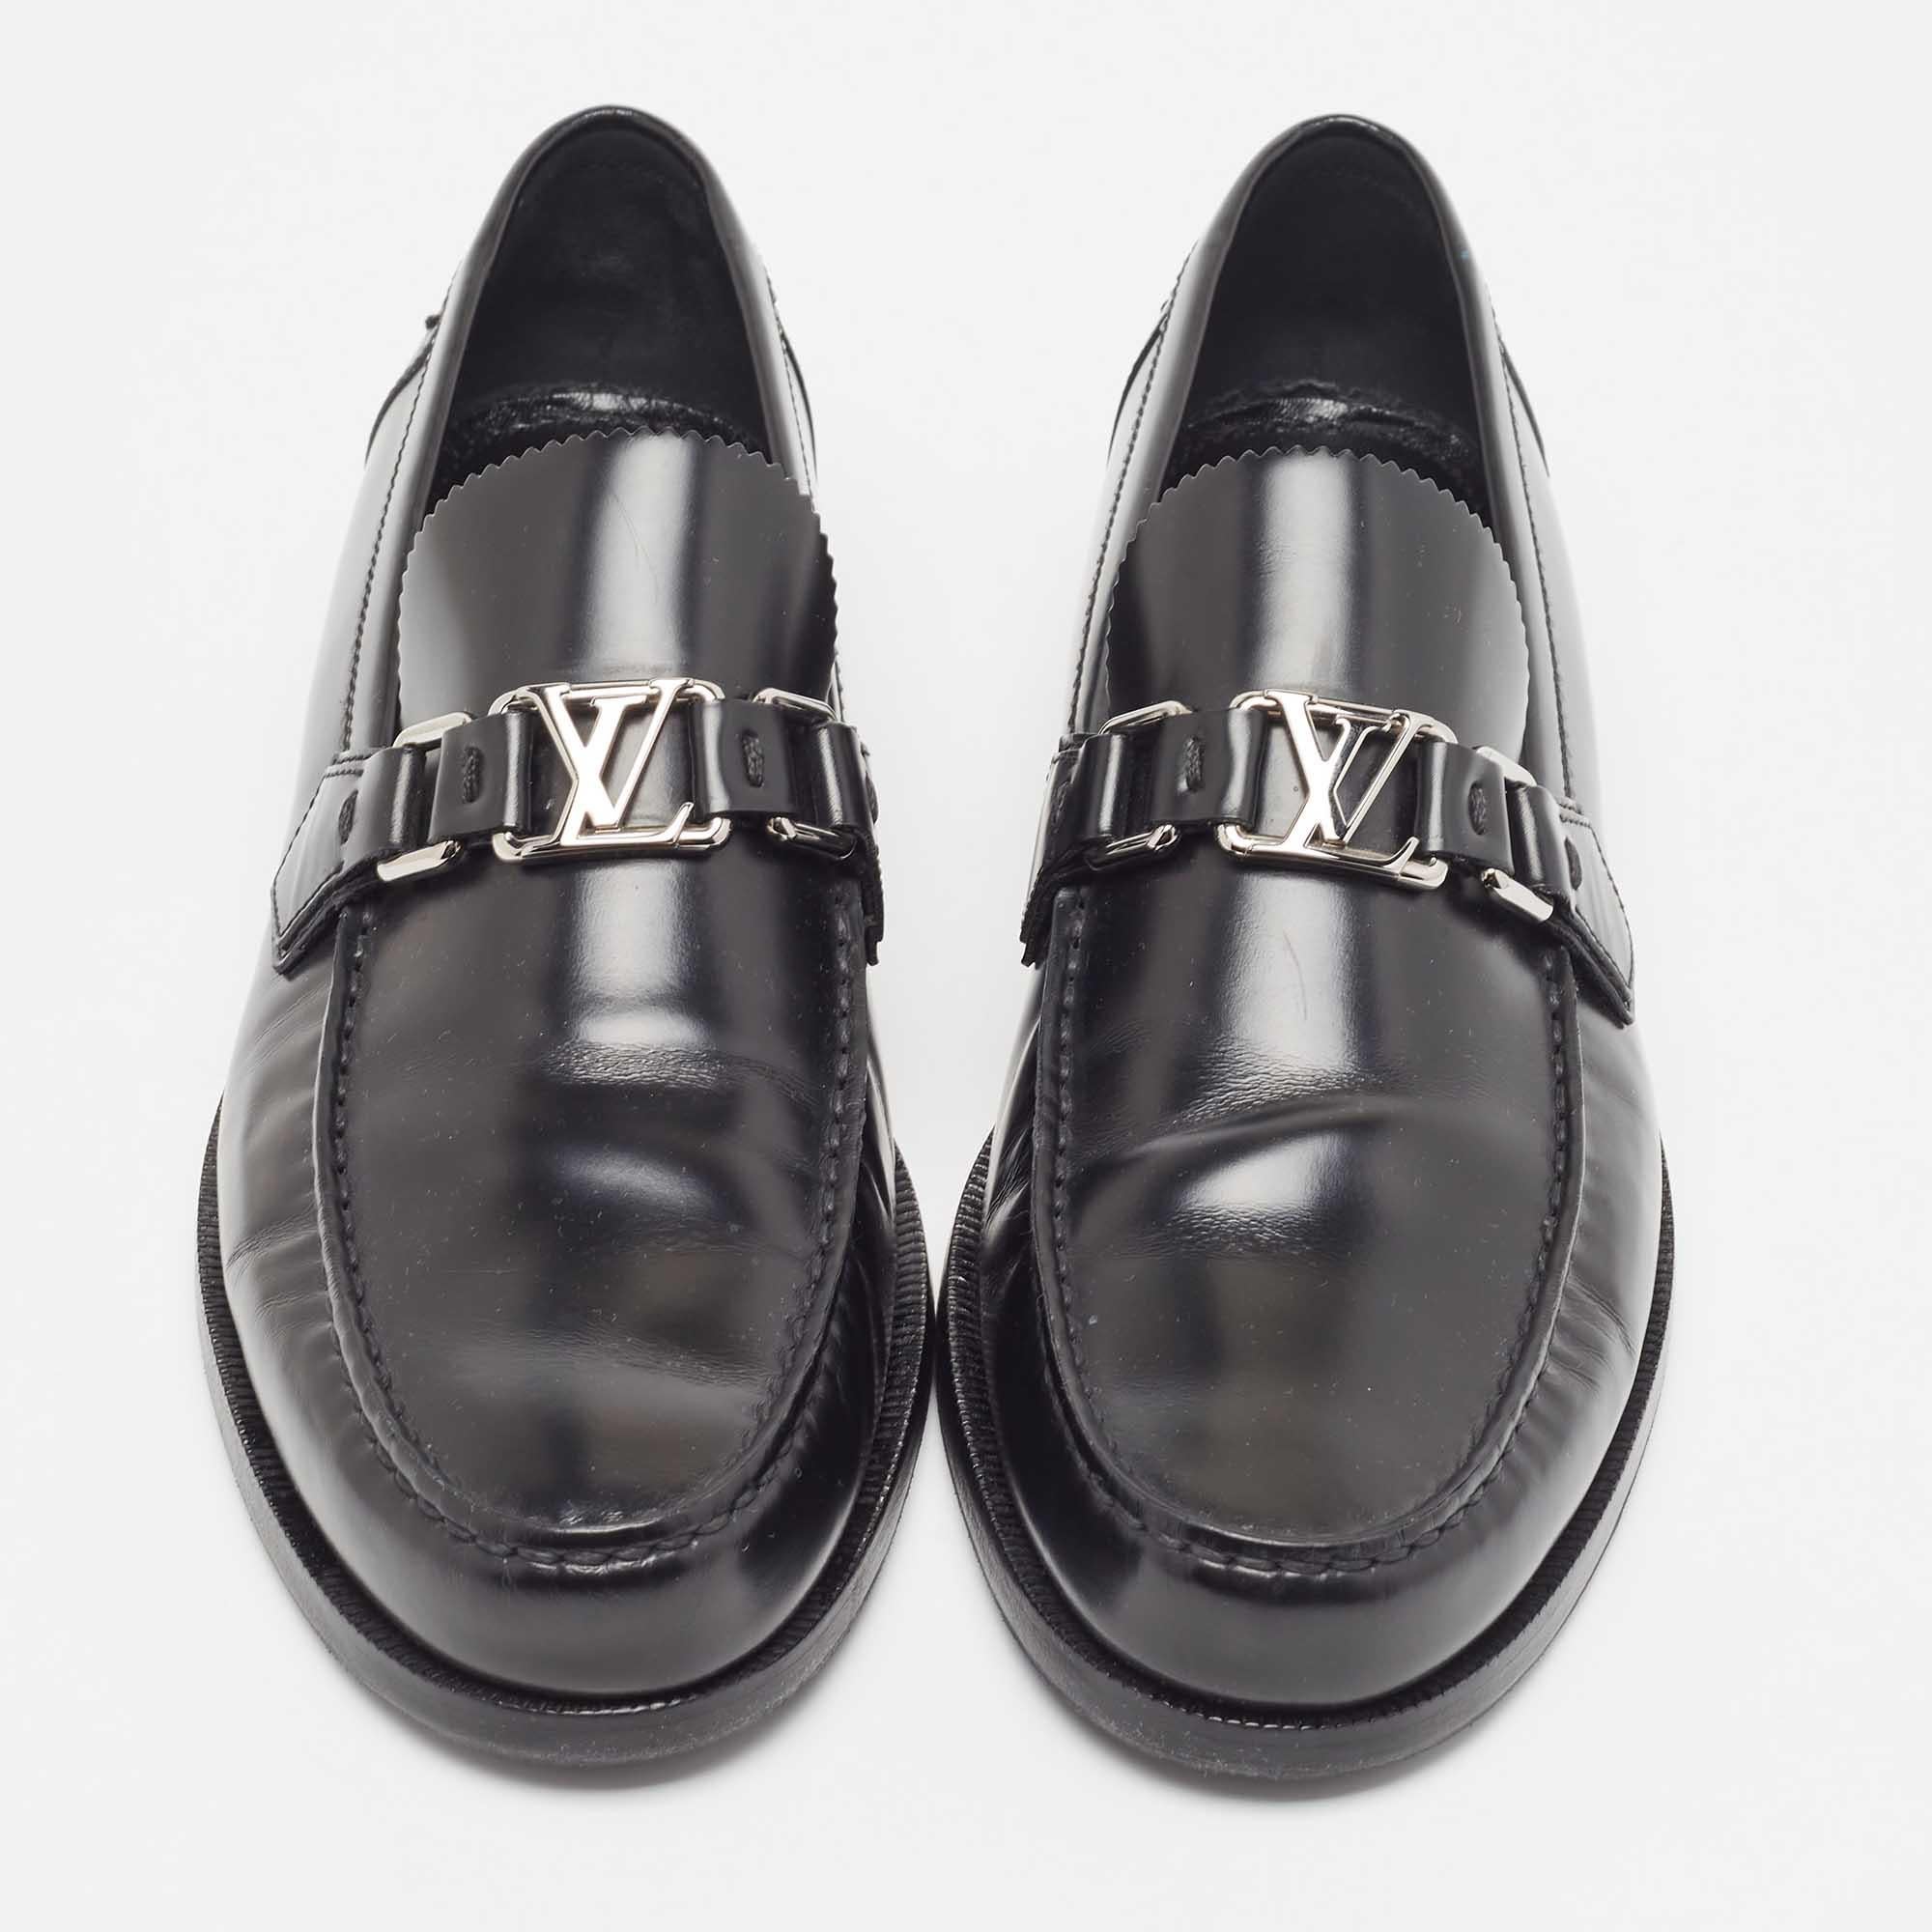 Practical, fashionable, and durable—these designer loafers are carefully built to be fine companions to your everyday style. They come made using the best materials to be a prized buy.

Includes: Original Dustbag, Original Box

